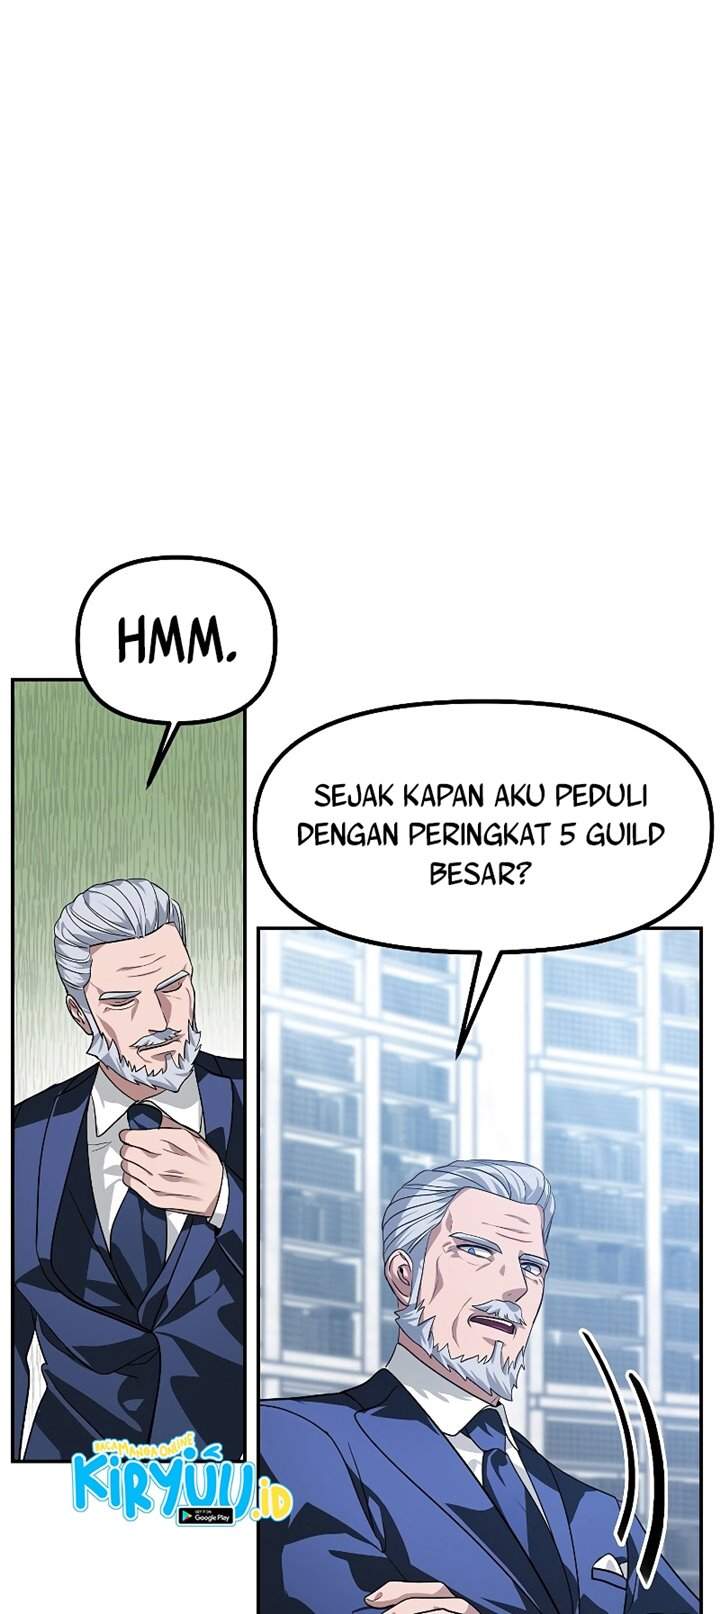 SSS-Class Suicide Hunter Chapter 53